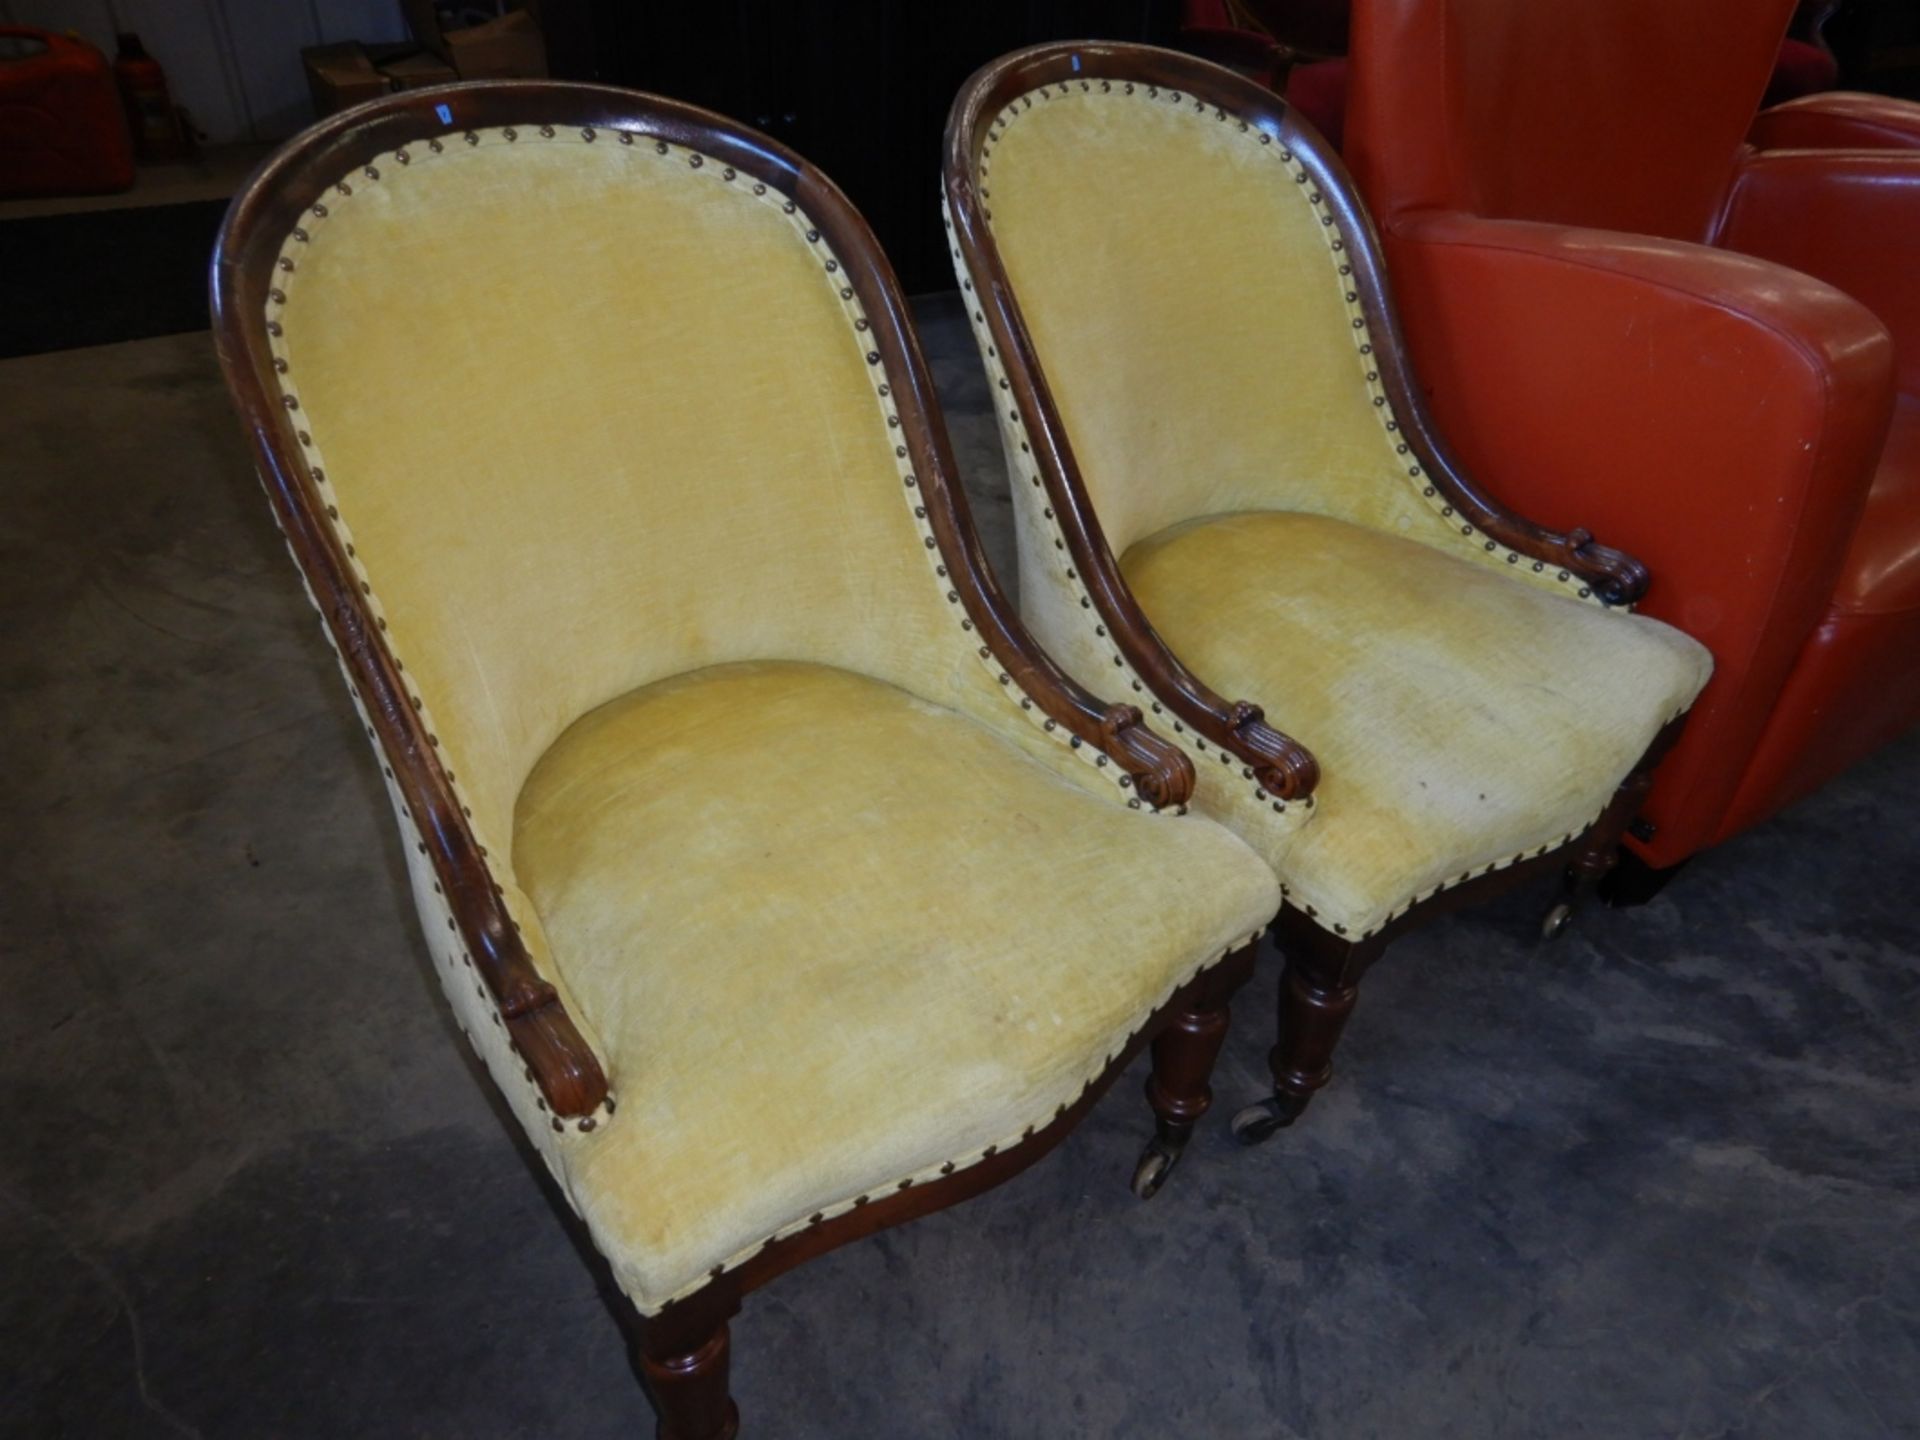 ANTIQUE PARLOR CHAIRS (2) - YELLOW - Image 12 of 13